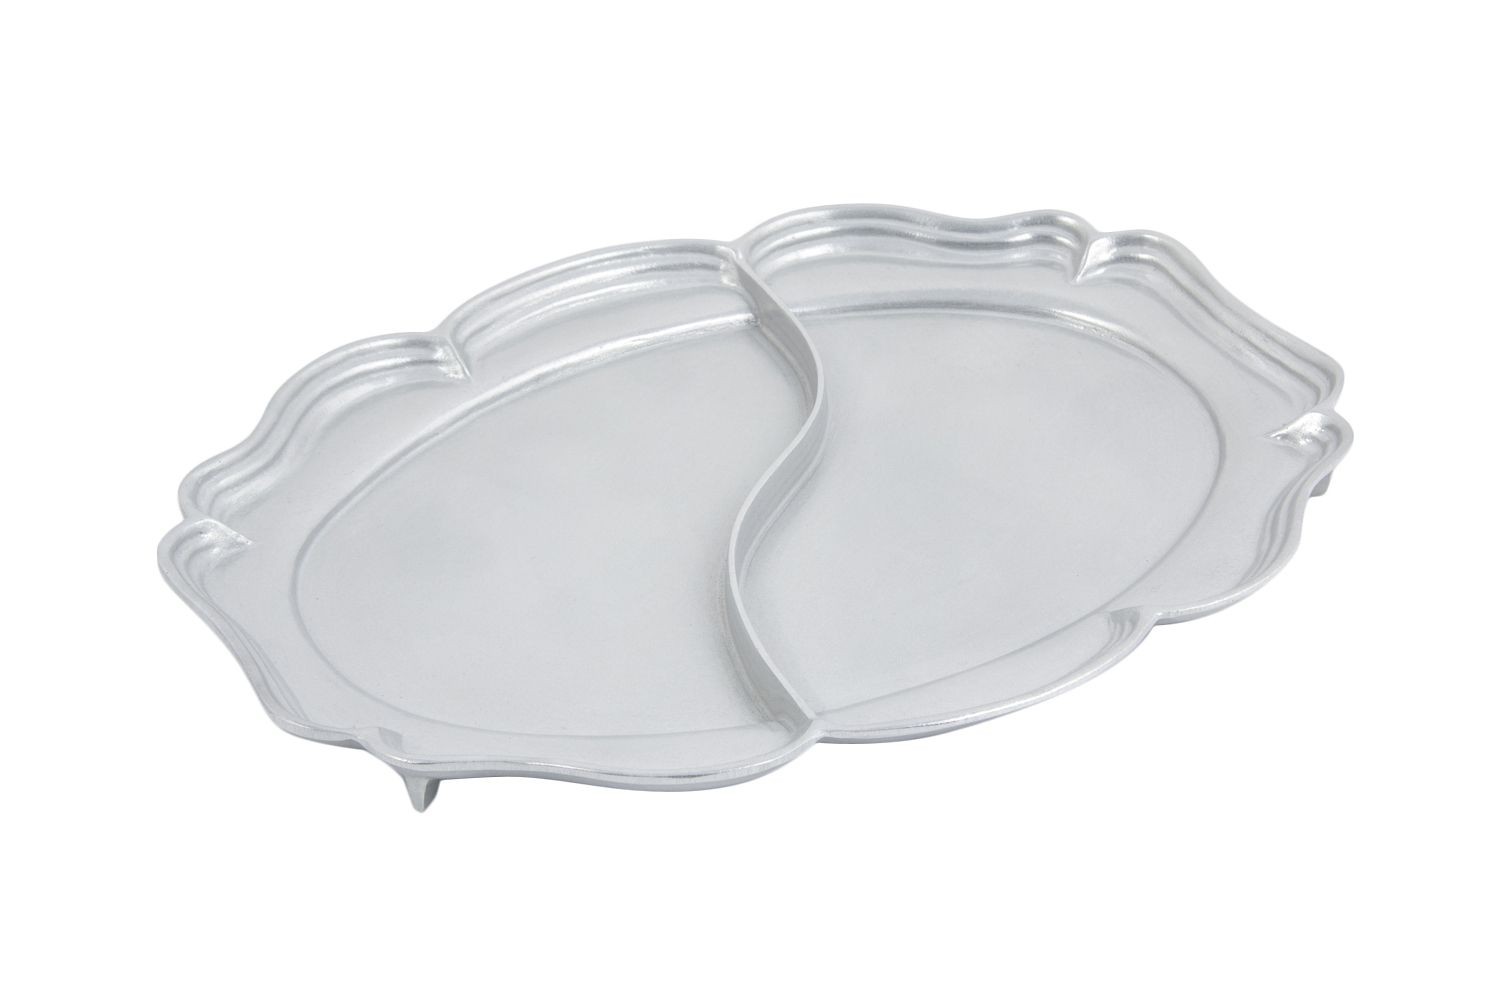 Bon Chef 2028DP Queen Anne Divided Platter, Pewter Glo 14 3/4" x 20"